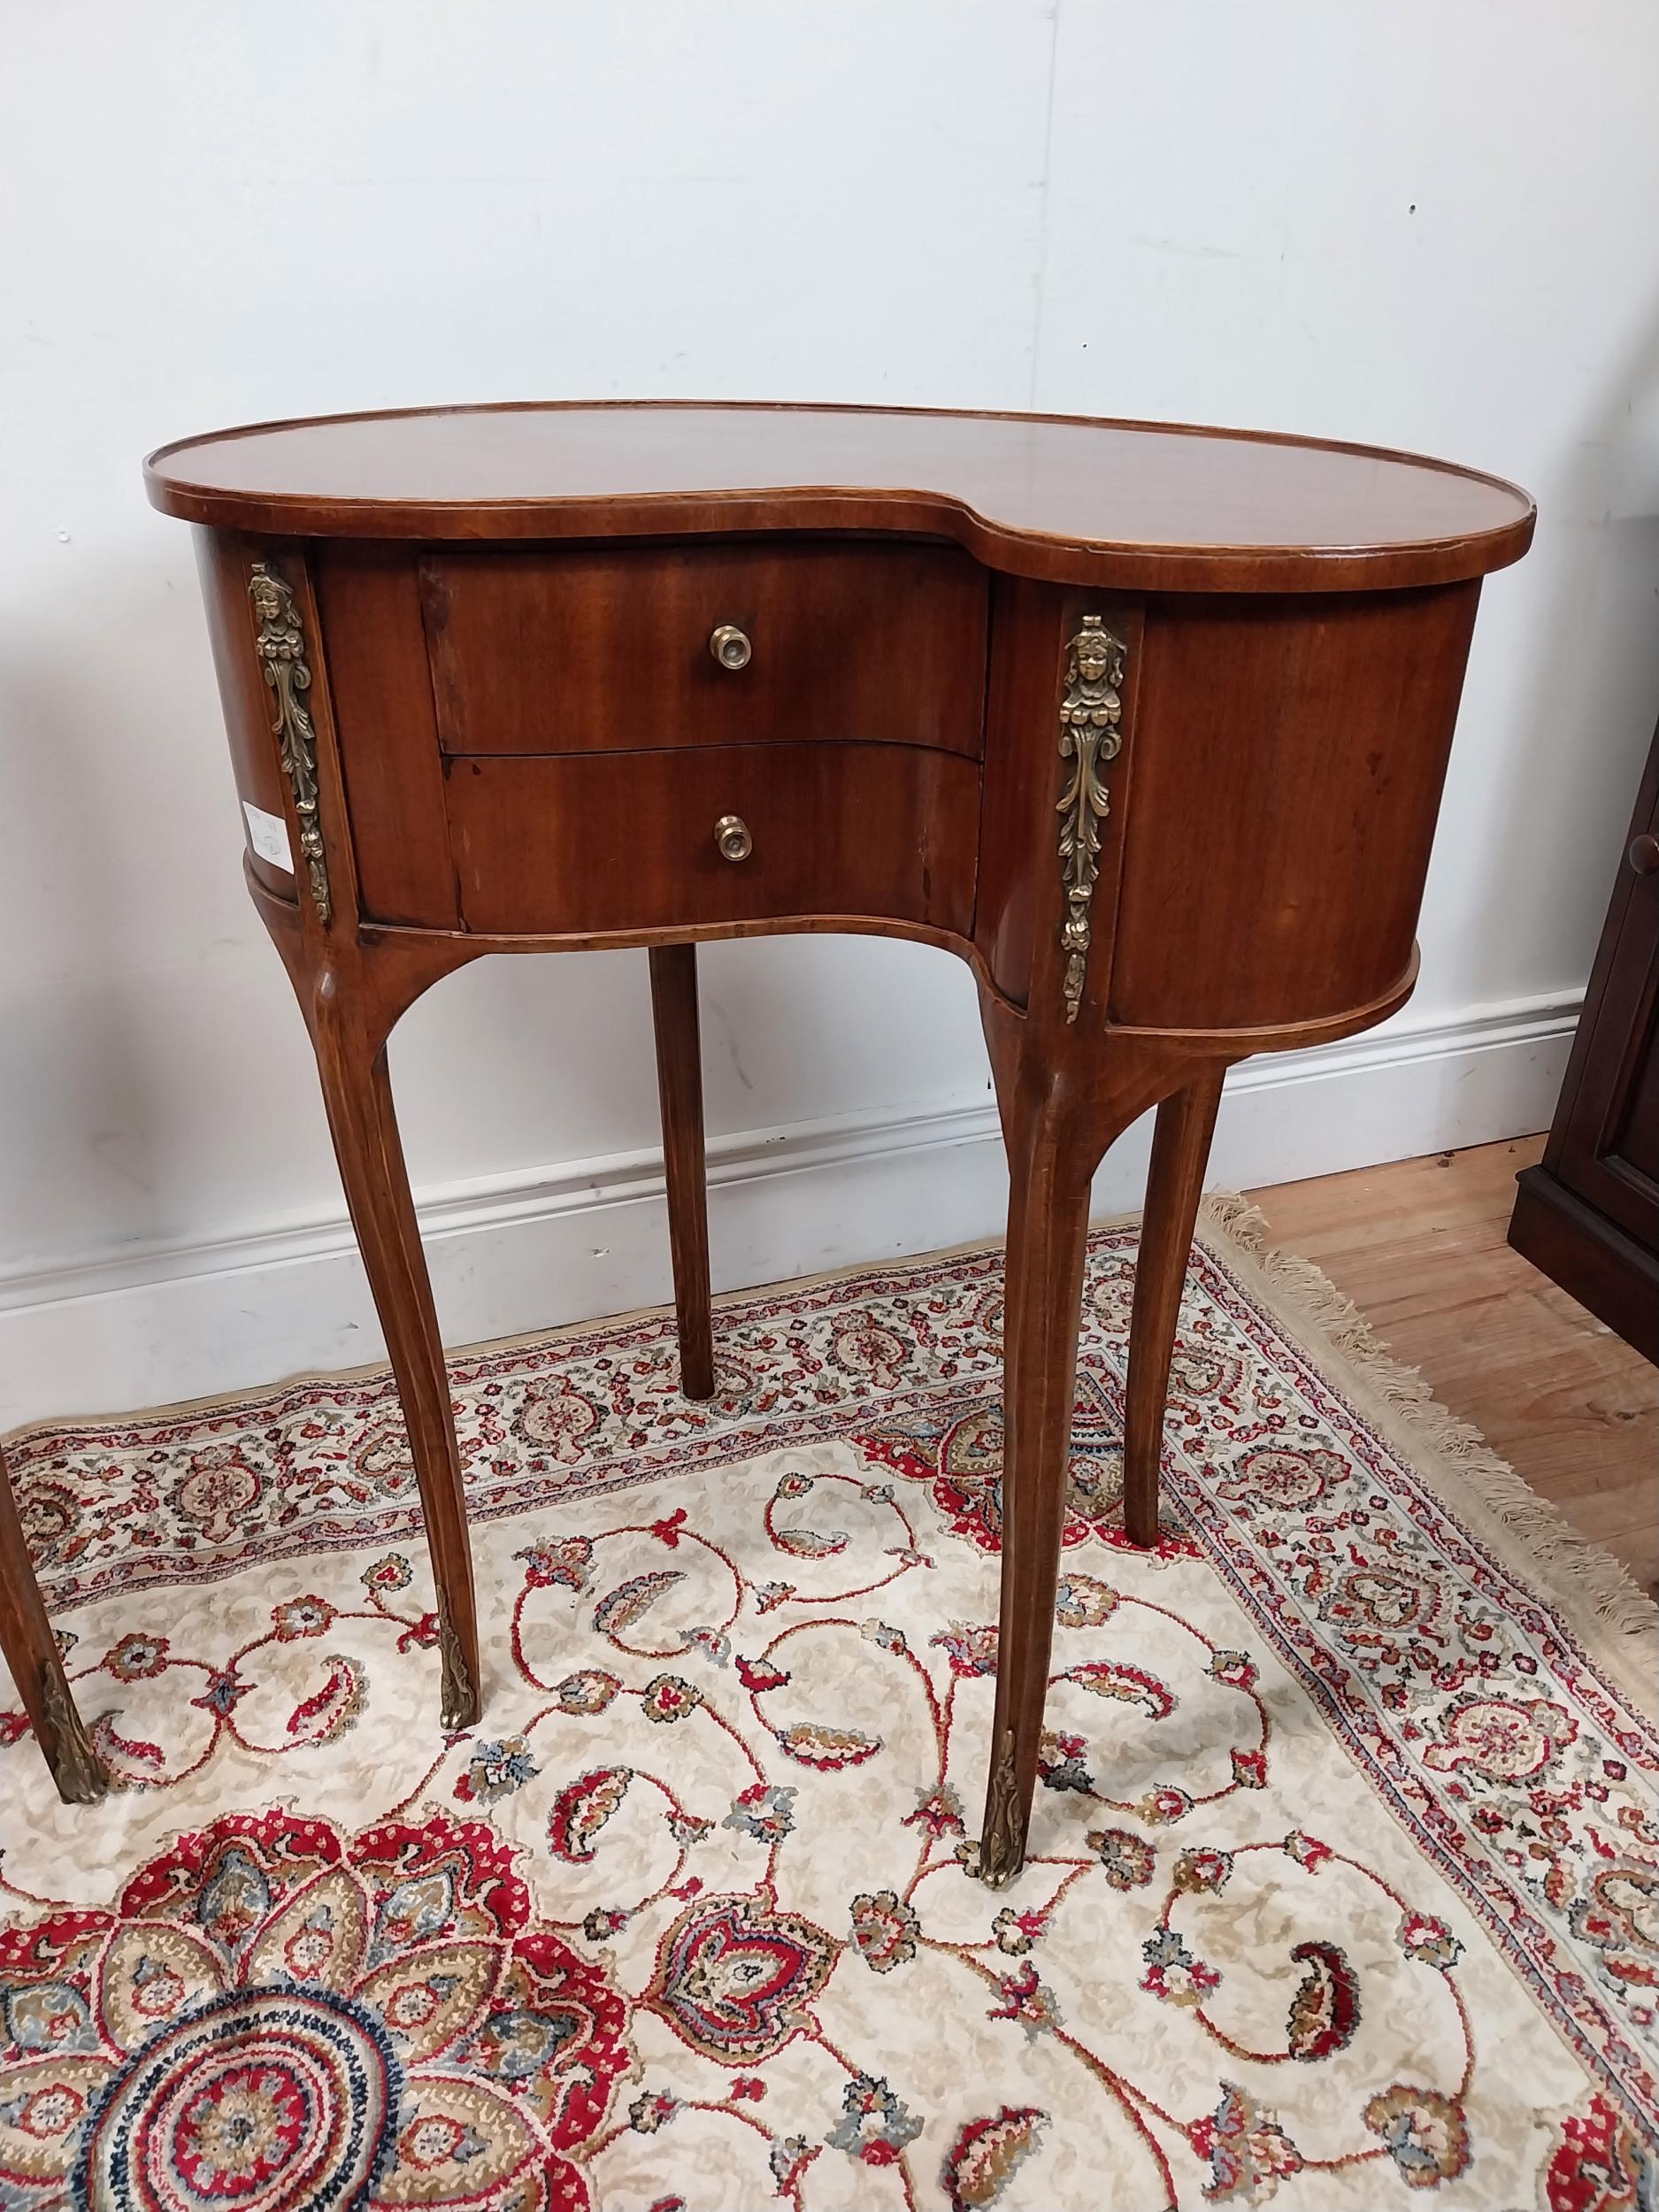 Pair of good quality kidney shaped walnut bedside cabinets with ormolou mounts raised on cabriole - Image 2 of 4